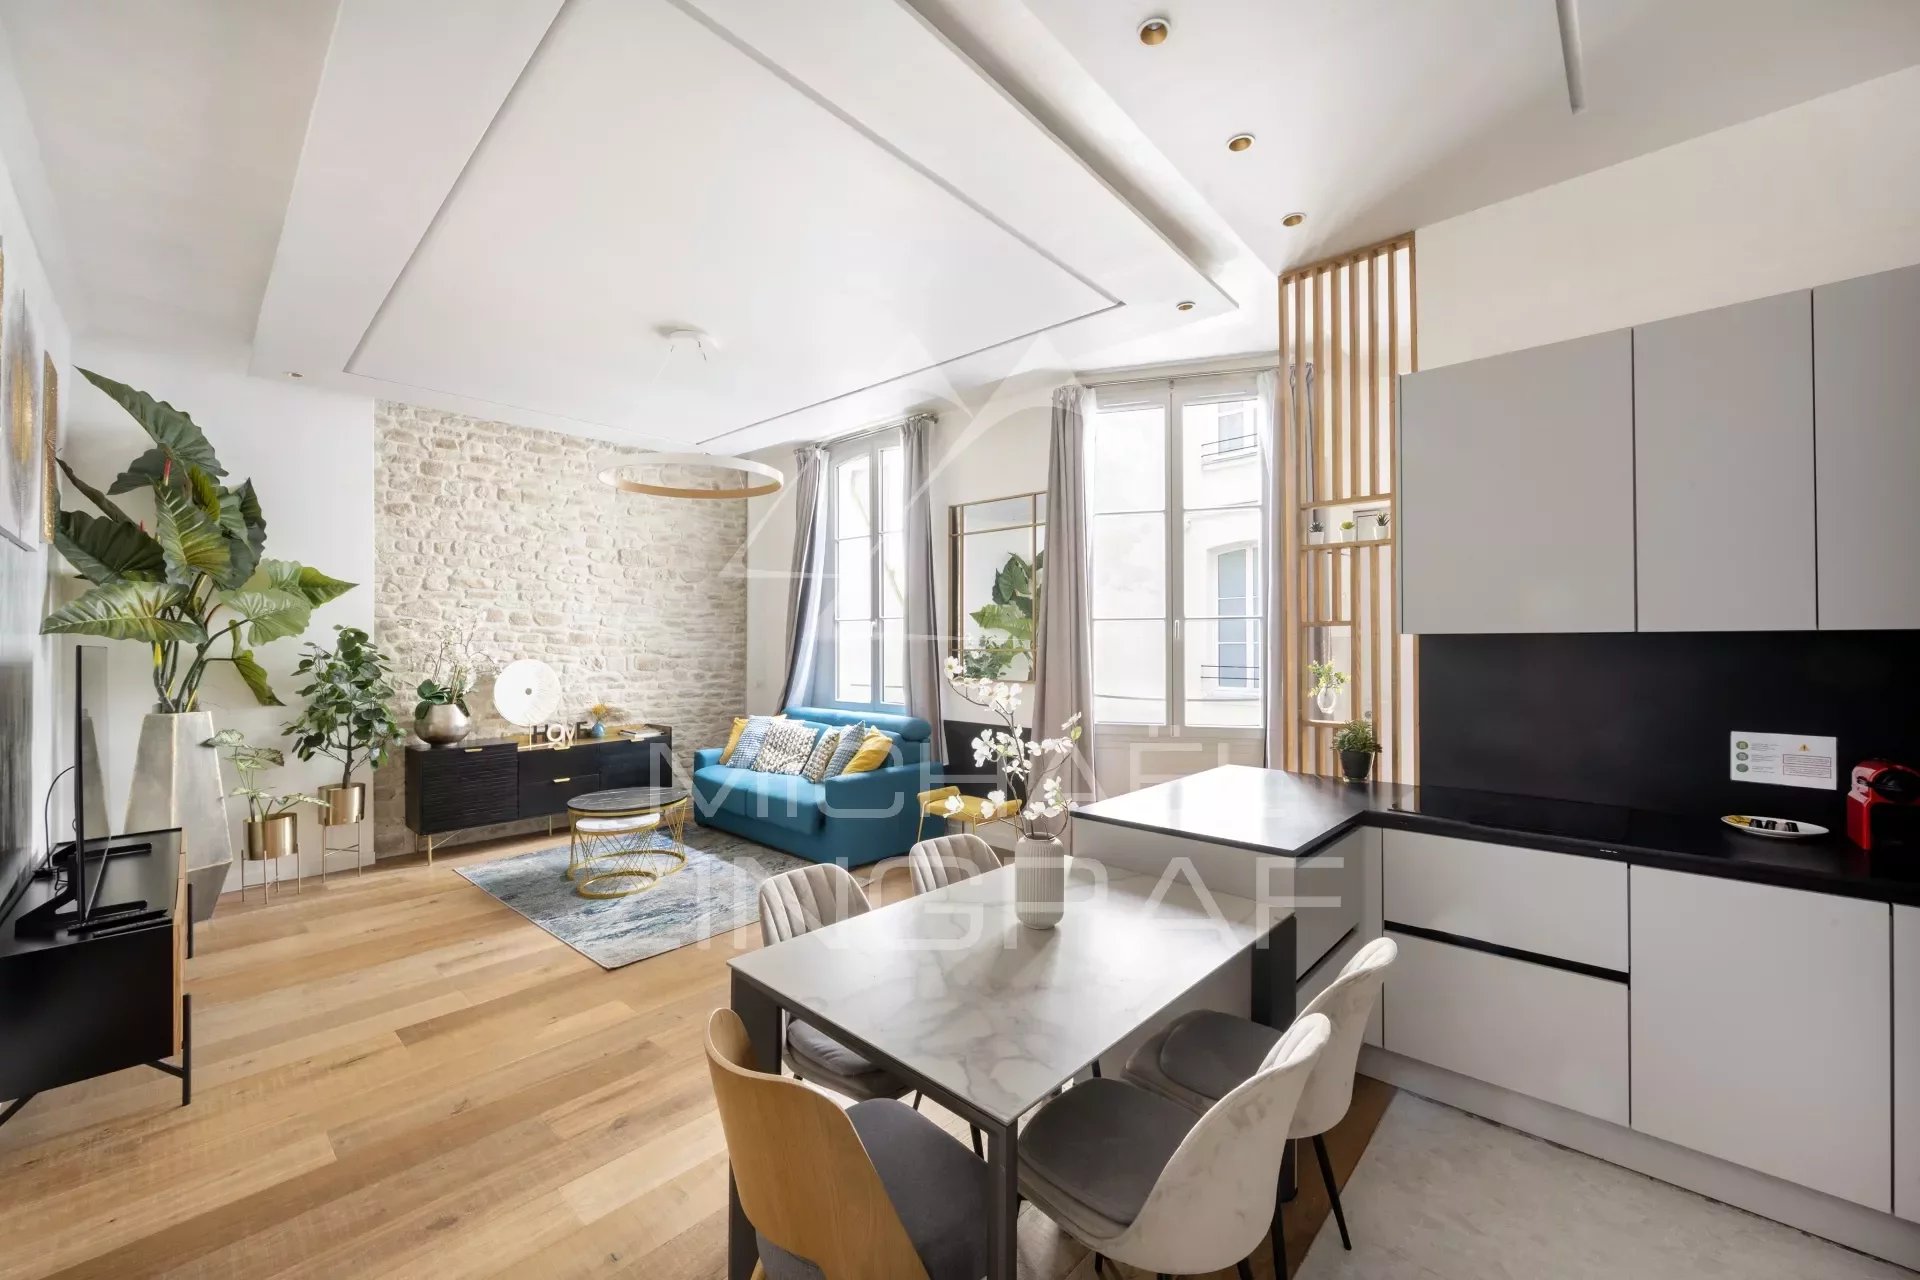 Sale apartment - full heart of the Marais - completely renovated